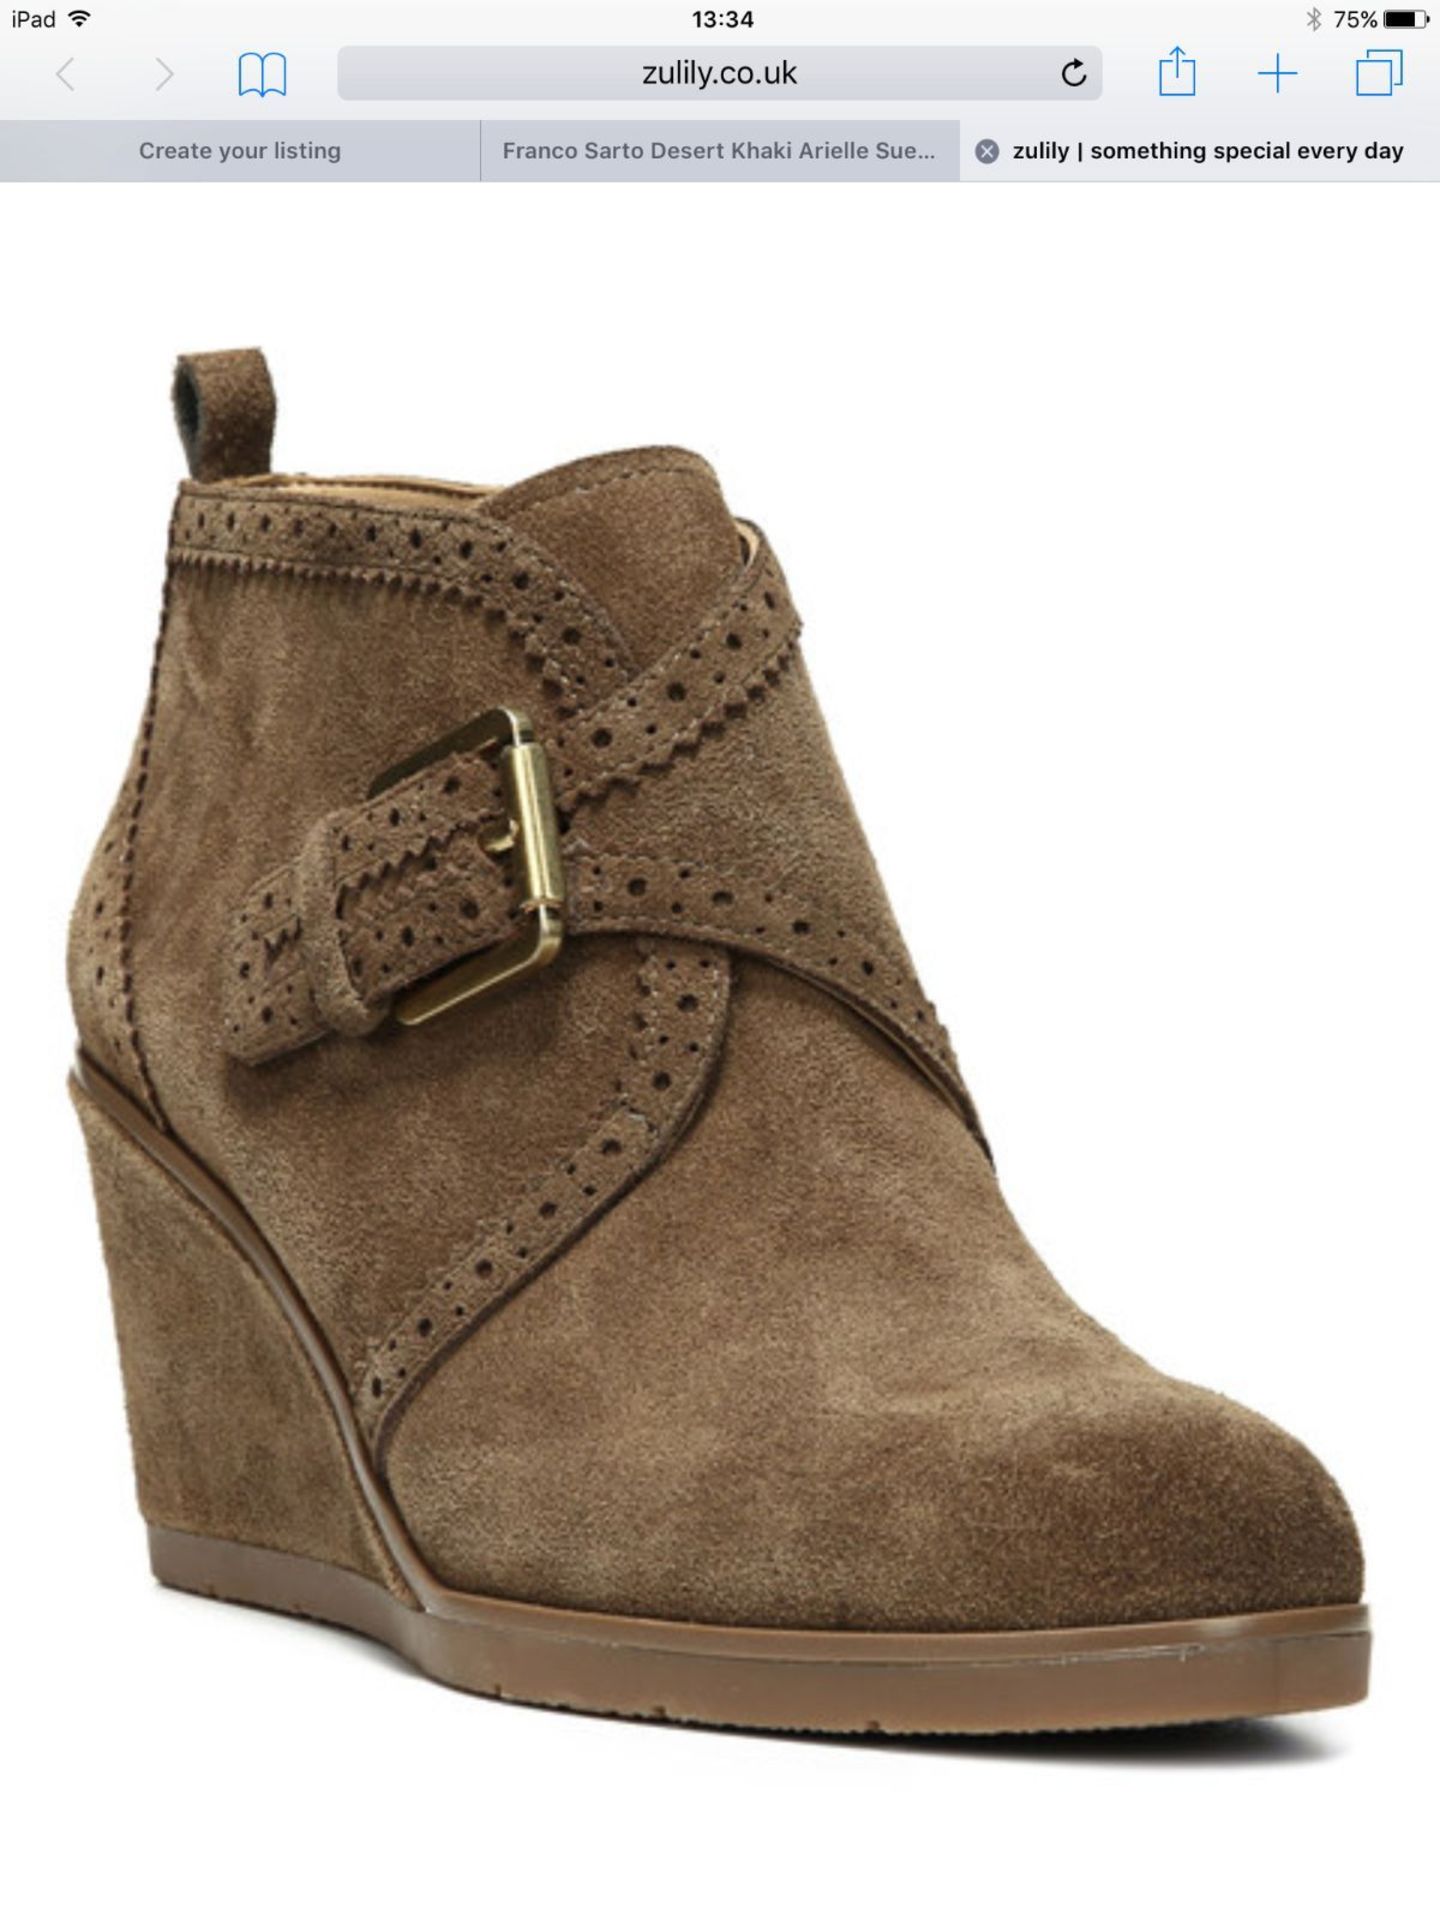 Franco Sarto Desert Khaki Arielle Suede Wedge Bootie, Size UK 6, RRP £151.99 (New with box) - Image 7 of 8